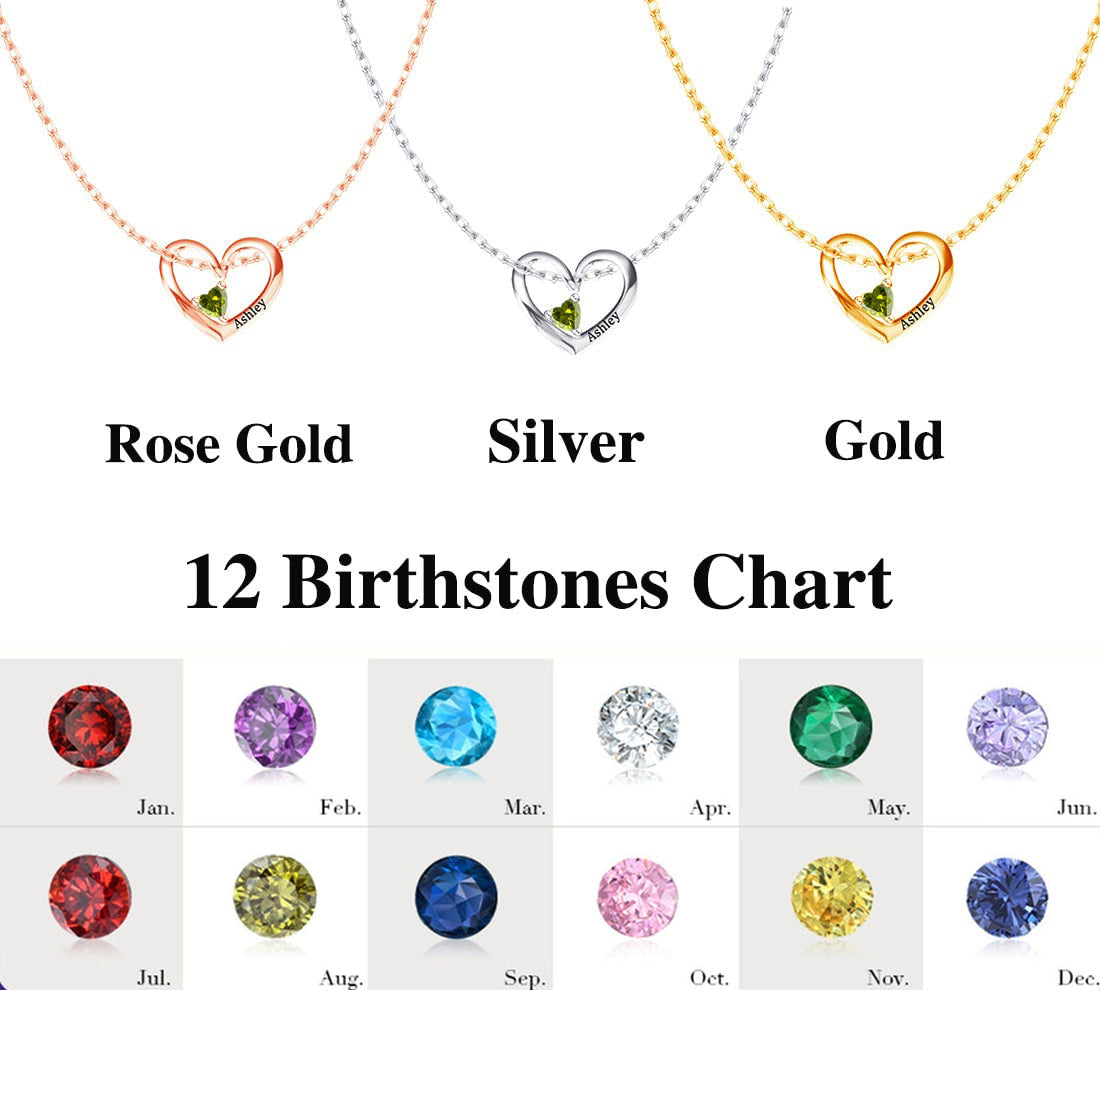 ❤️Heart of Love Birthstone Necklace for lover❤️